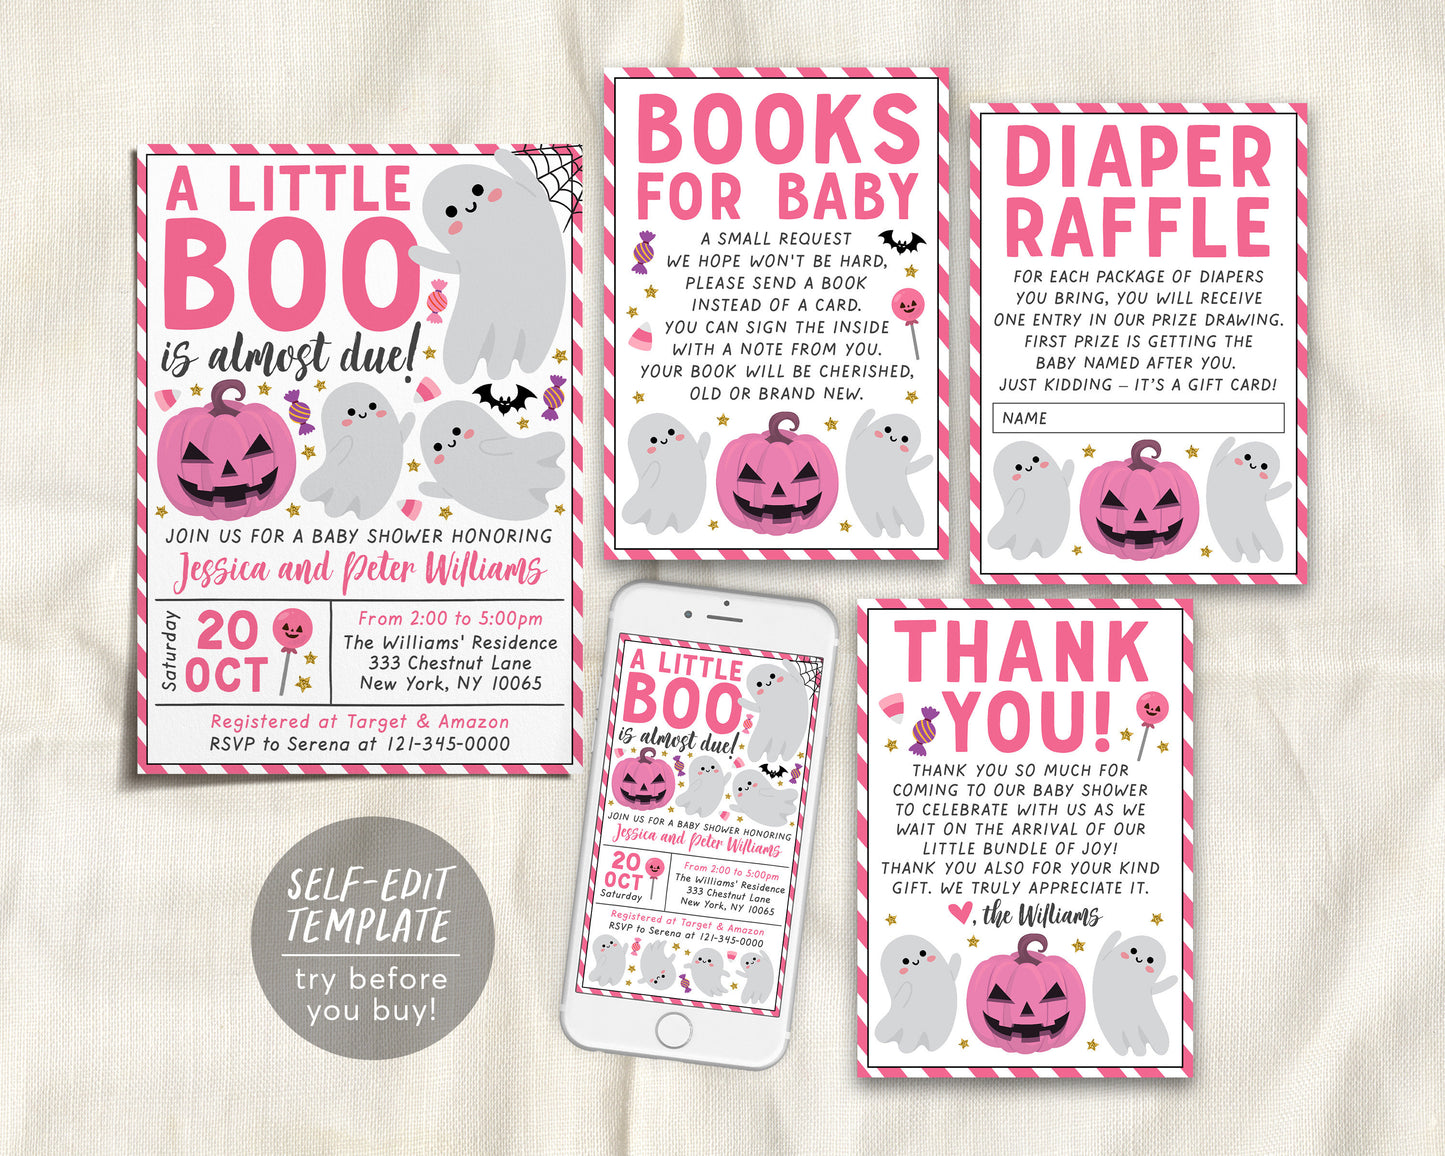 A Little Boo is Almost Due Baby Shower Invitation BUNDLE Suite Editable Template, Girl Halloween Invite Book Request Diaper Raffle Thank You